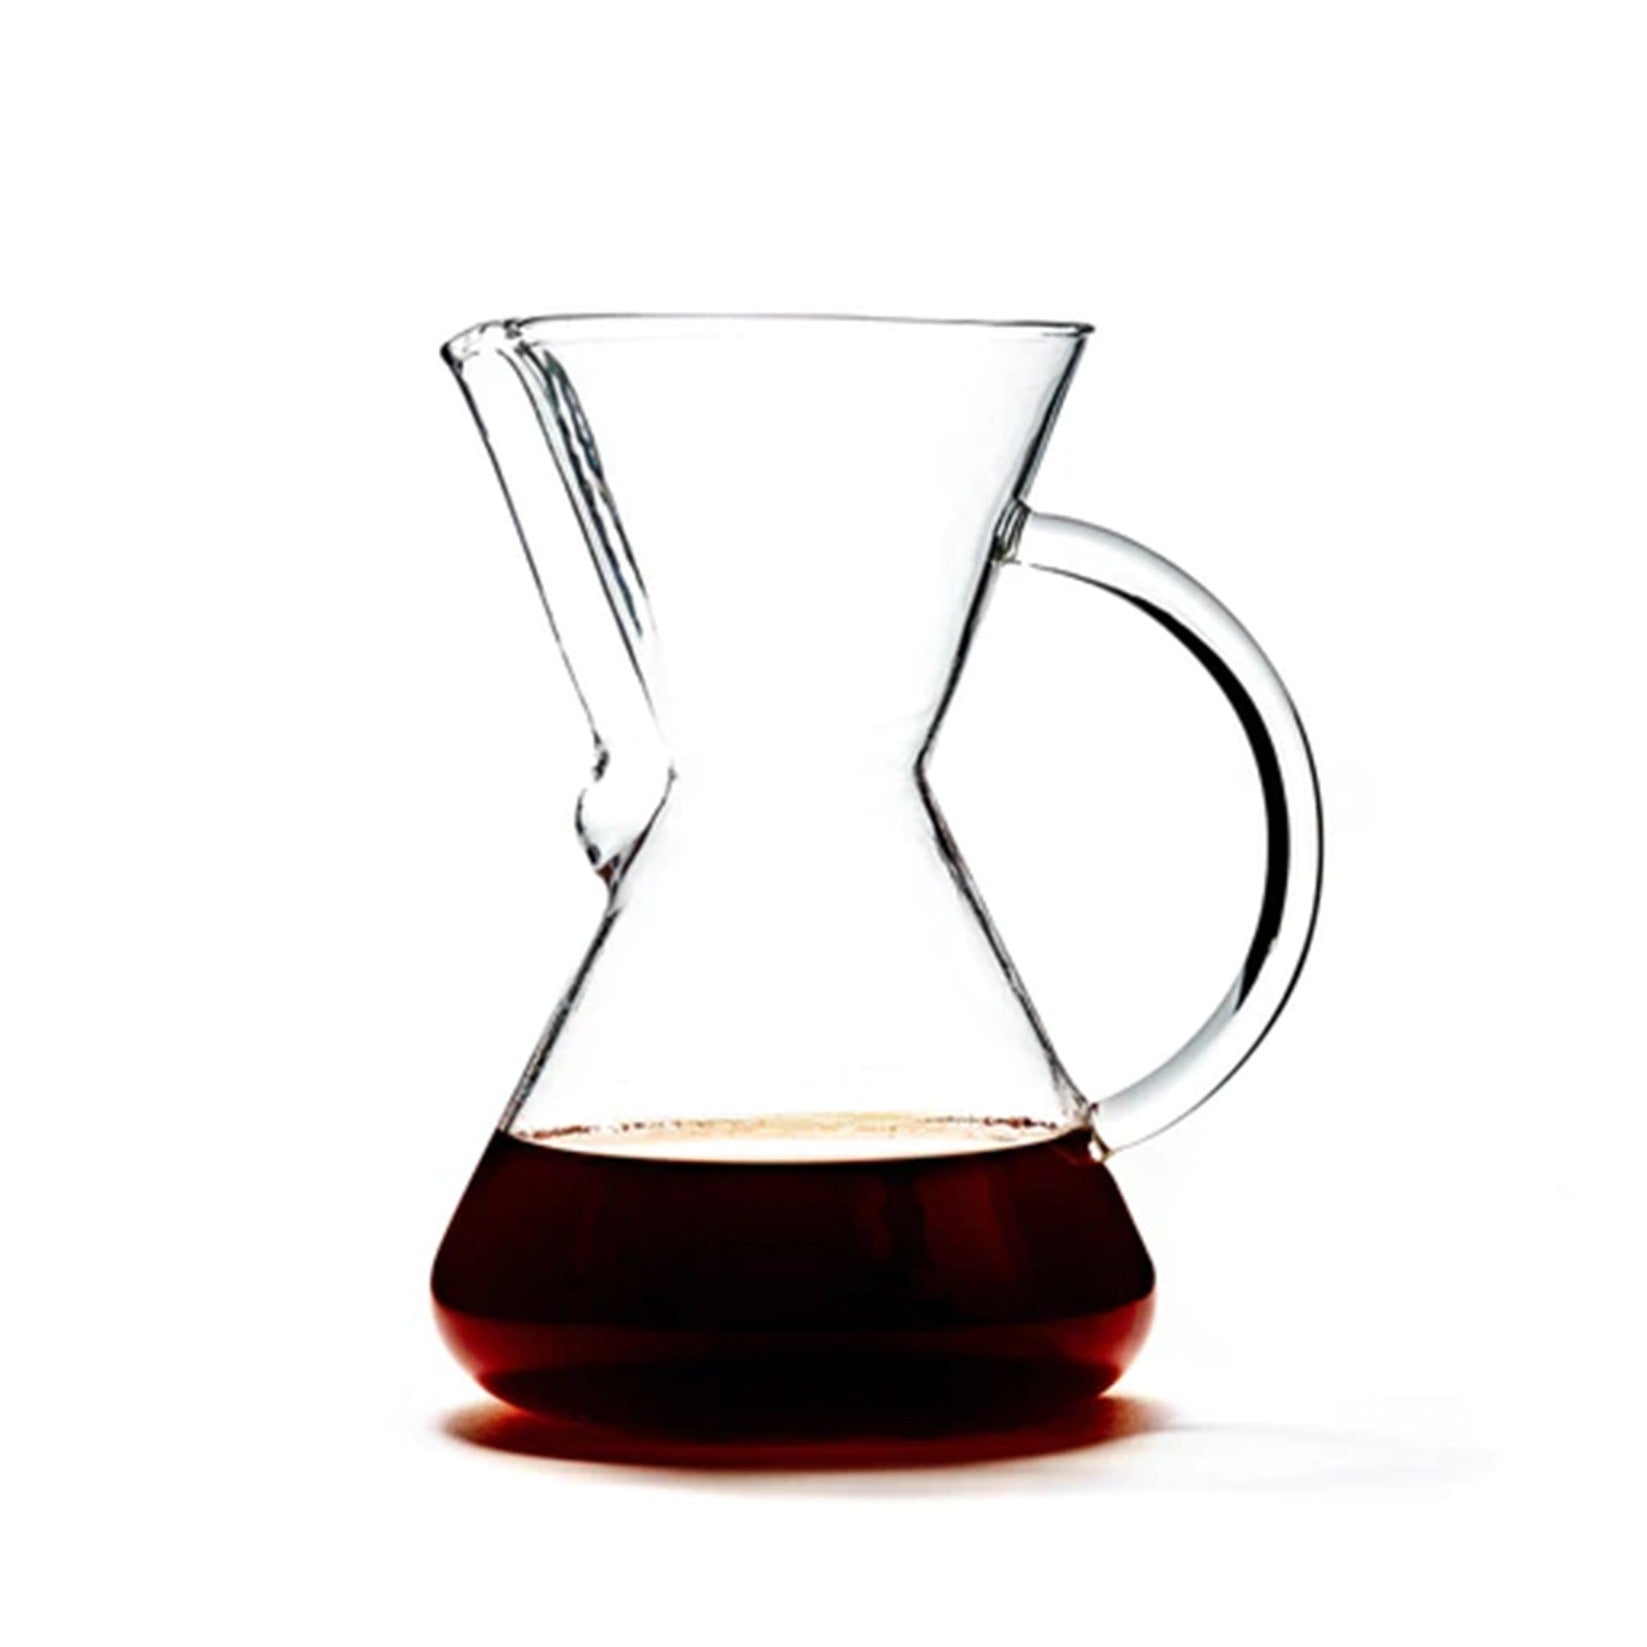 SAI G70 Pourover Coffee VesselSAI G70 Pourover Coffee VesselCollective Coffee Roasters70 degree brew column. Optimal geometry for even and complete extraction. - Handcrafted, heat resistant borosilicate glass